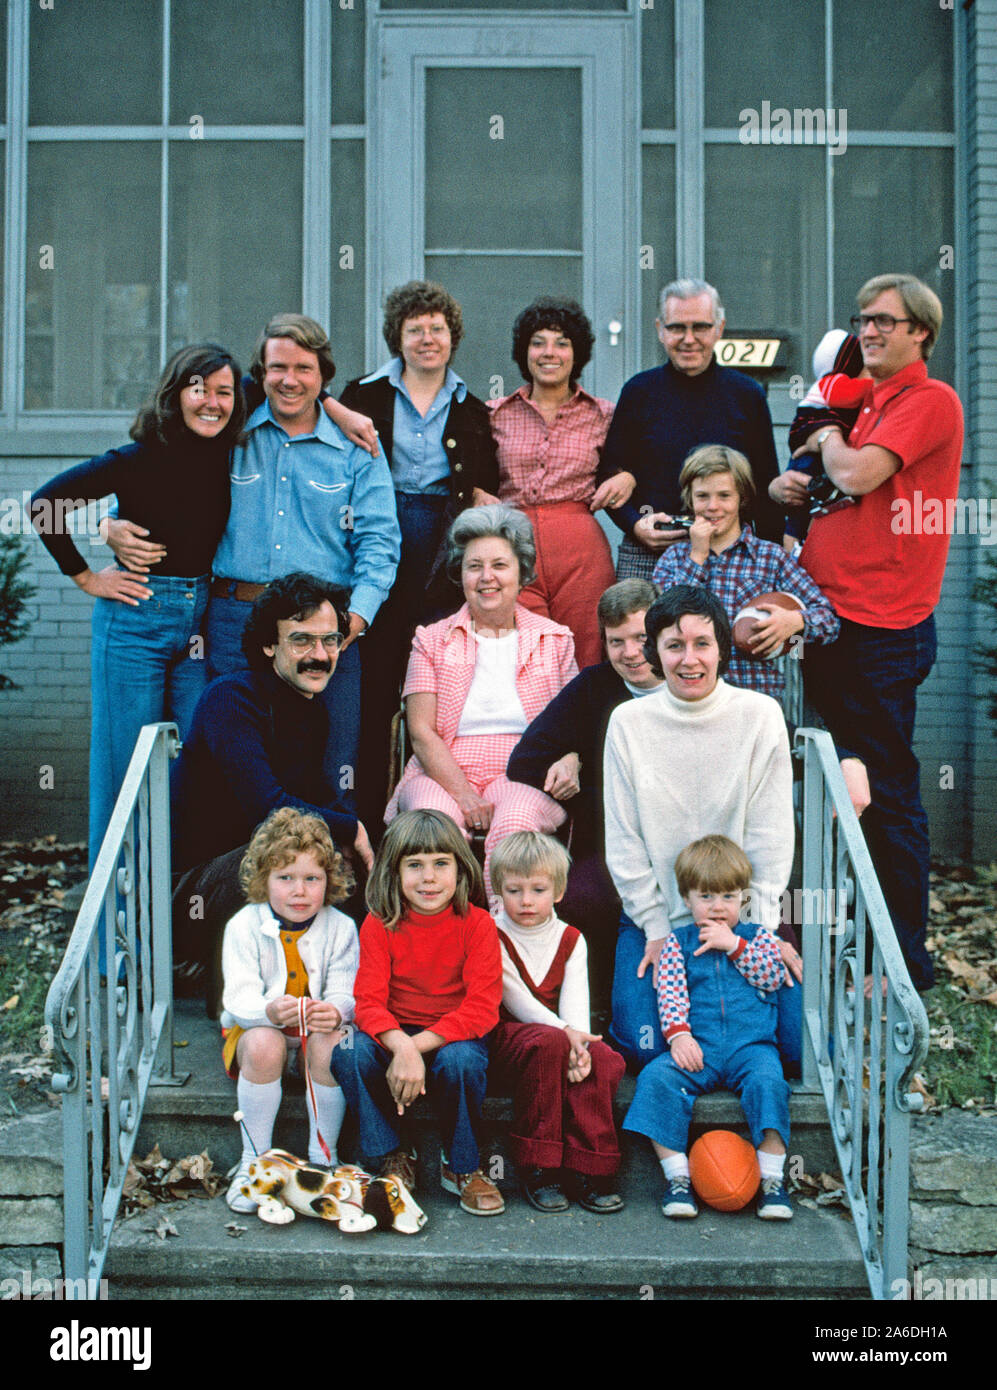 Sixteen members of an American family pose outdoors in 1975 on the front steps of the family home. The elderly gray-haired couple show off their two sons and two daughters with their wives and husbands and six grandchildren (including a sleeping baby hidden in the back row). The occasion was the family's annual reunion at Christmastime. Notice the 1970s hairstyles and clothing. Stock Photo